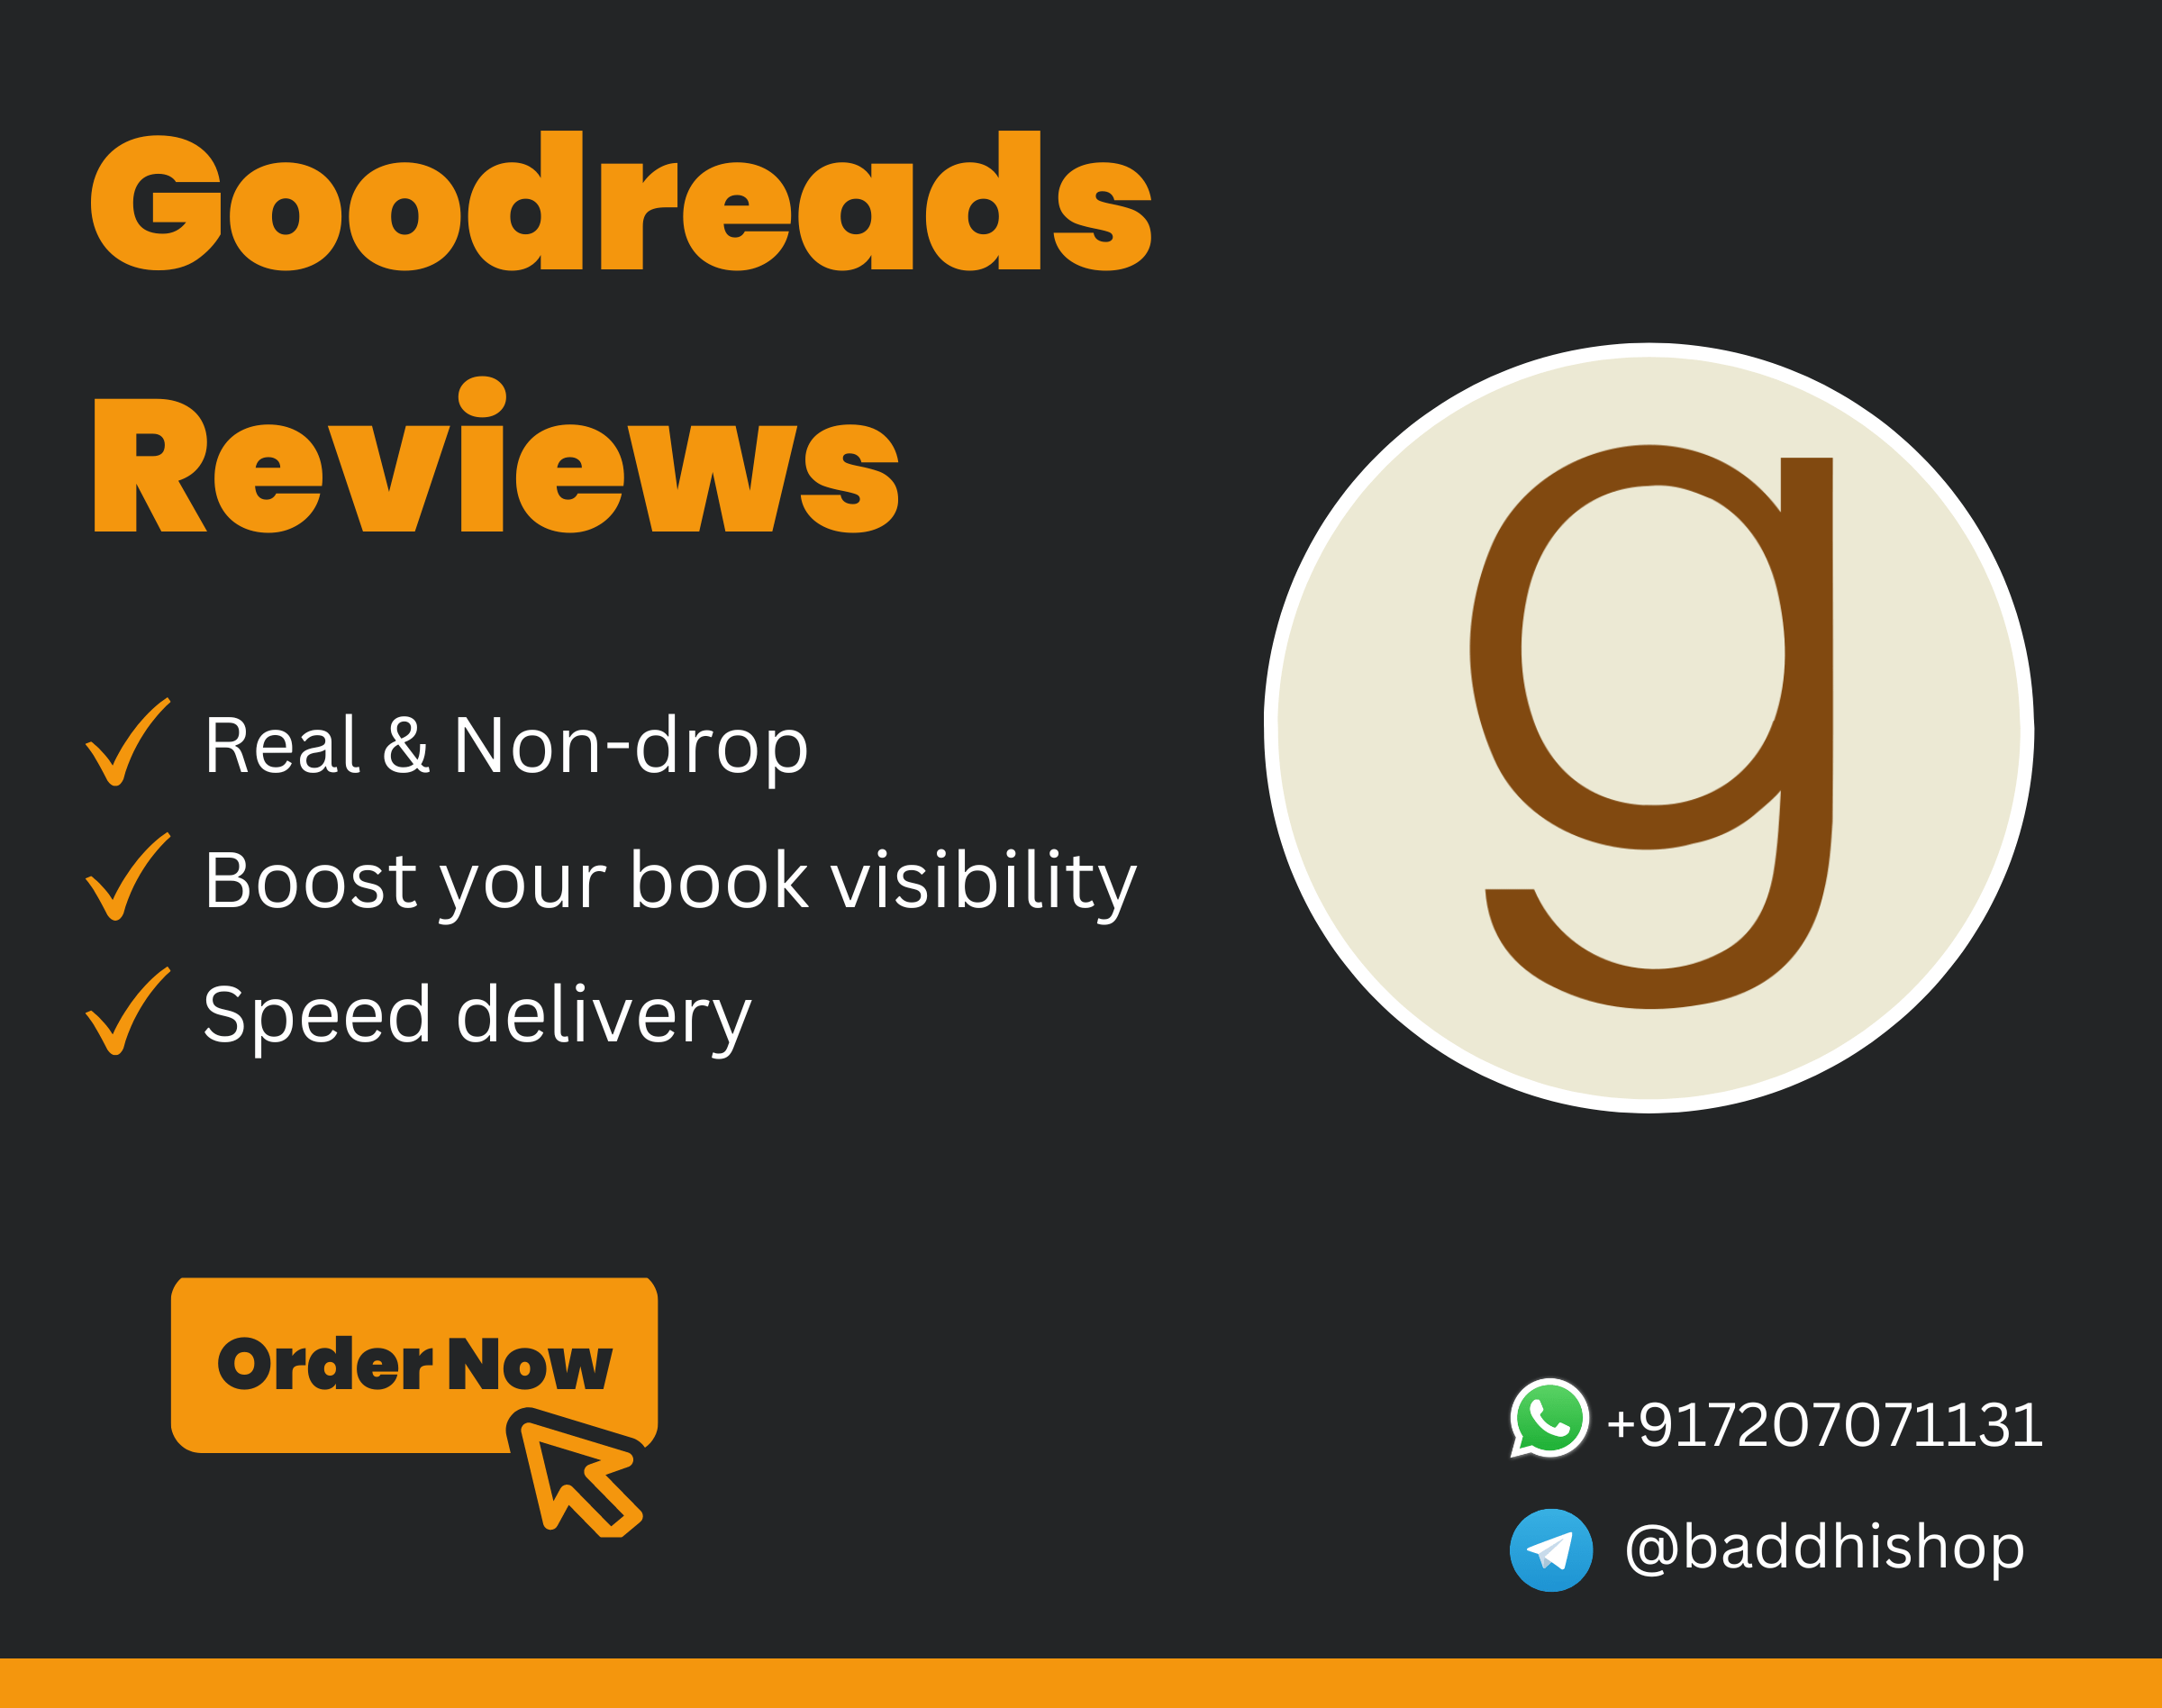 Buy Goodreads Reviews in Cheap Price